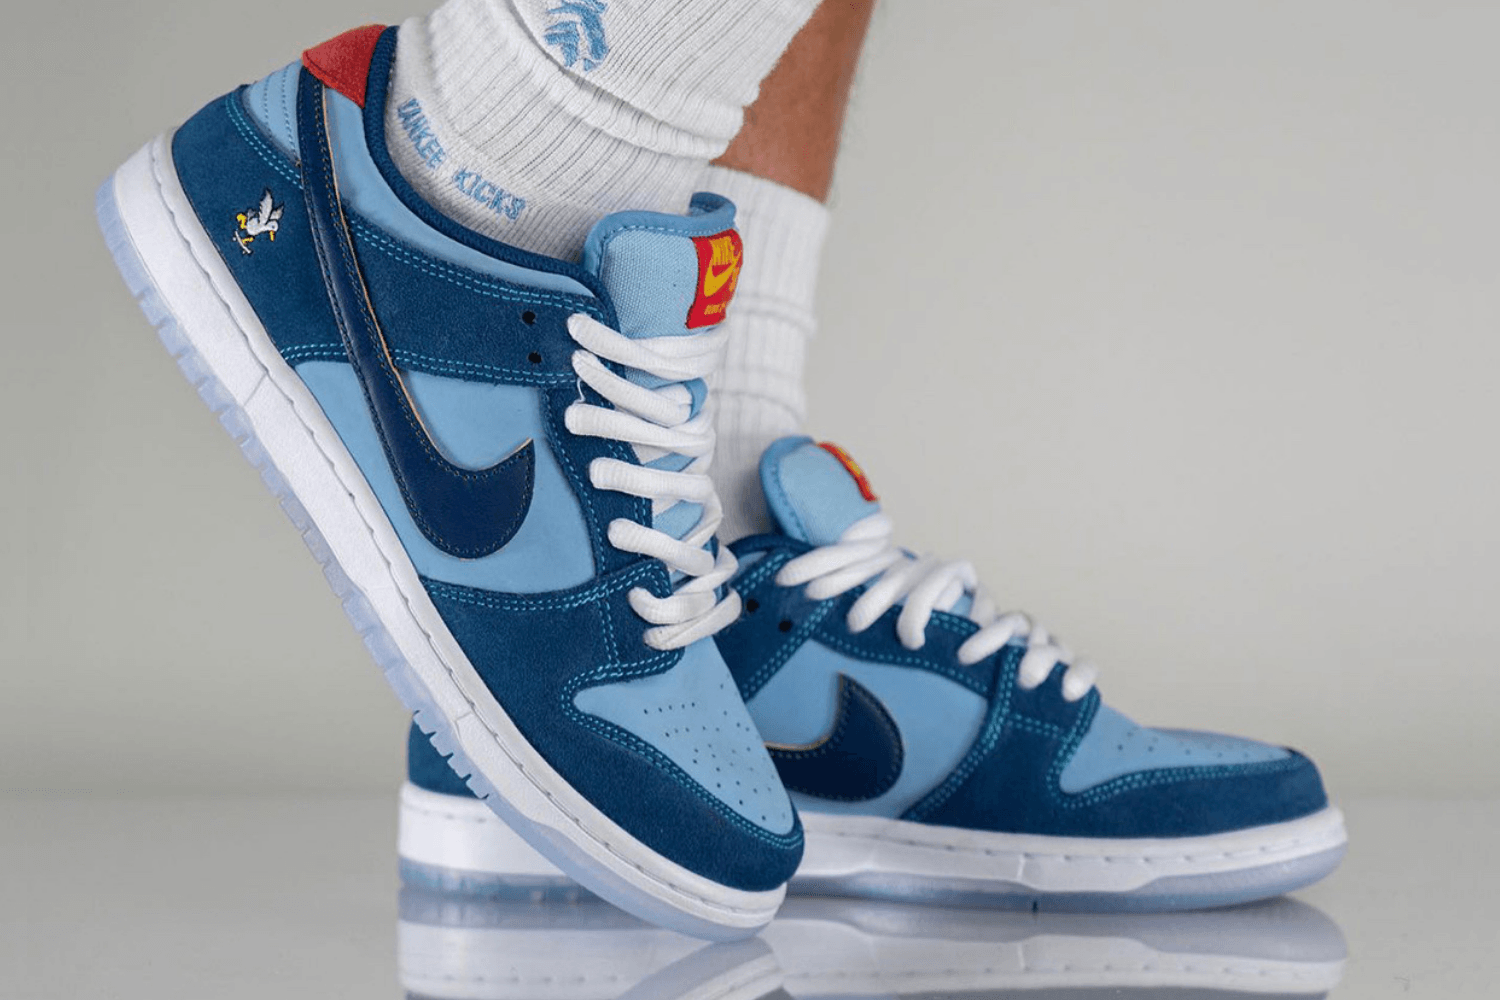 The Why So Sad? x Nike SB Dunk Low 'Coastal Blue' with an important message